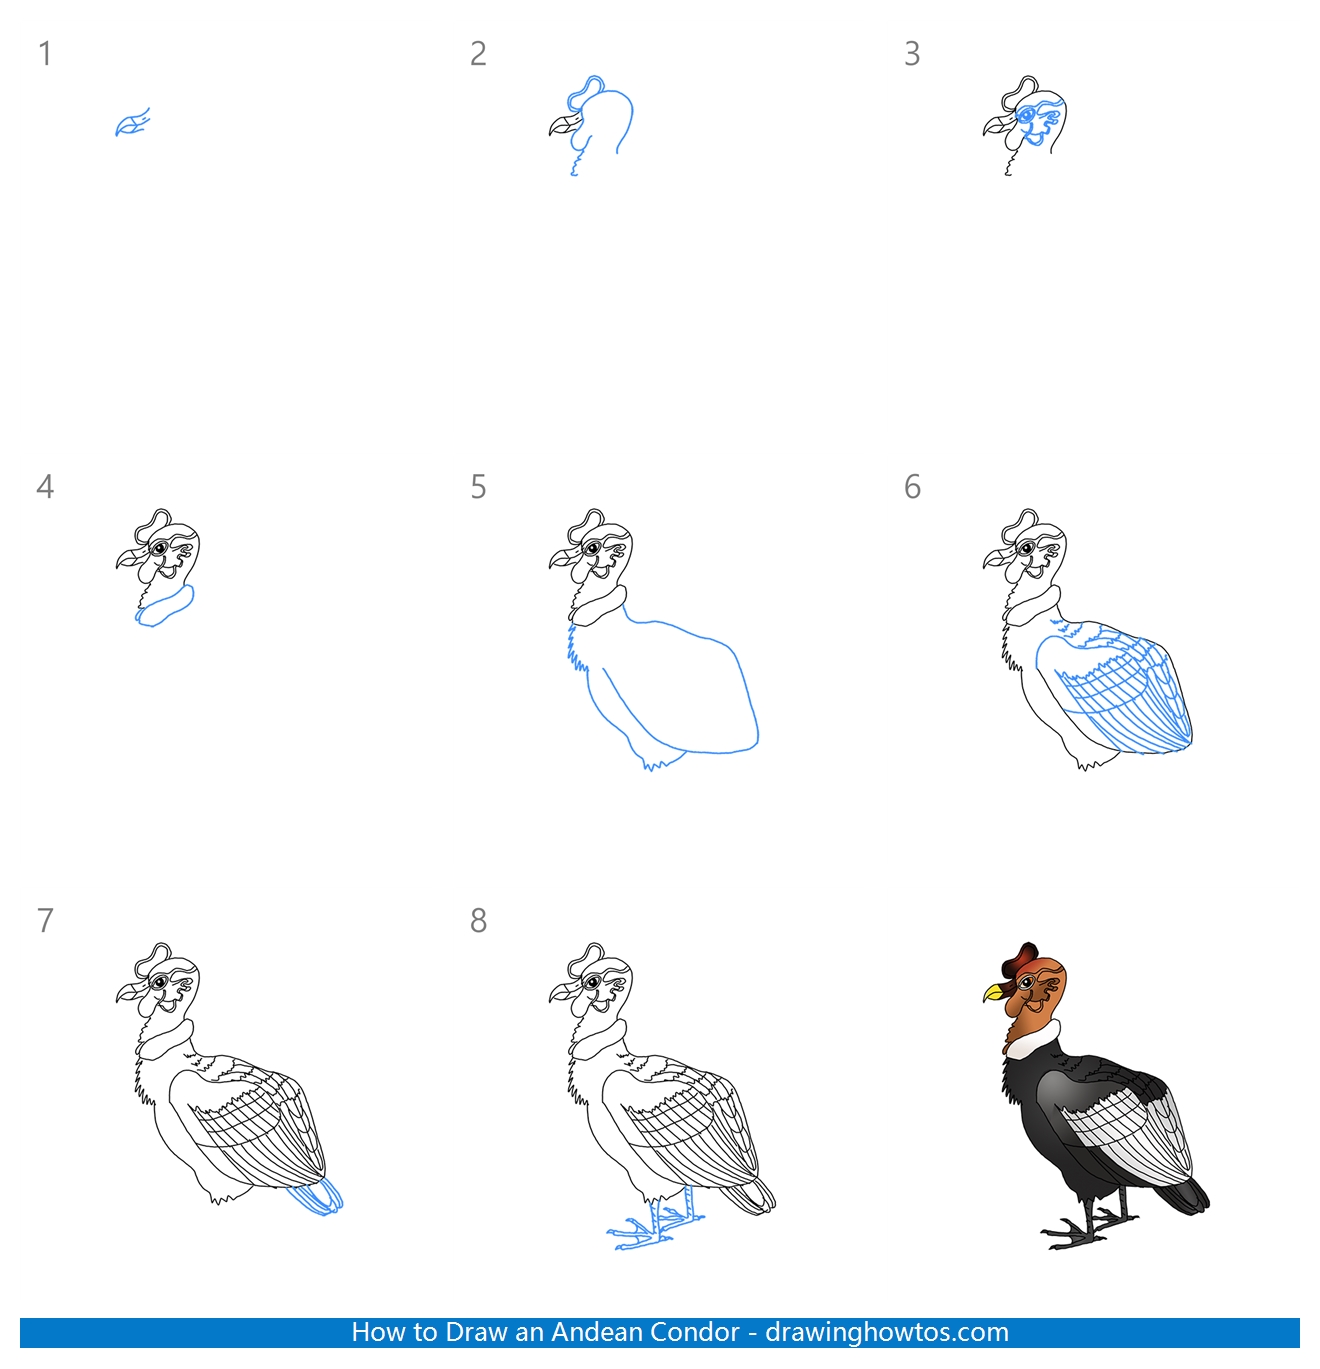 How to Draw an Andean Condor Step by Step